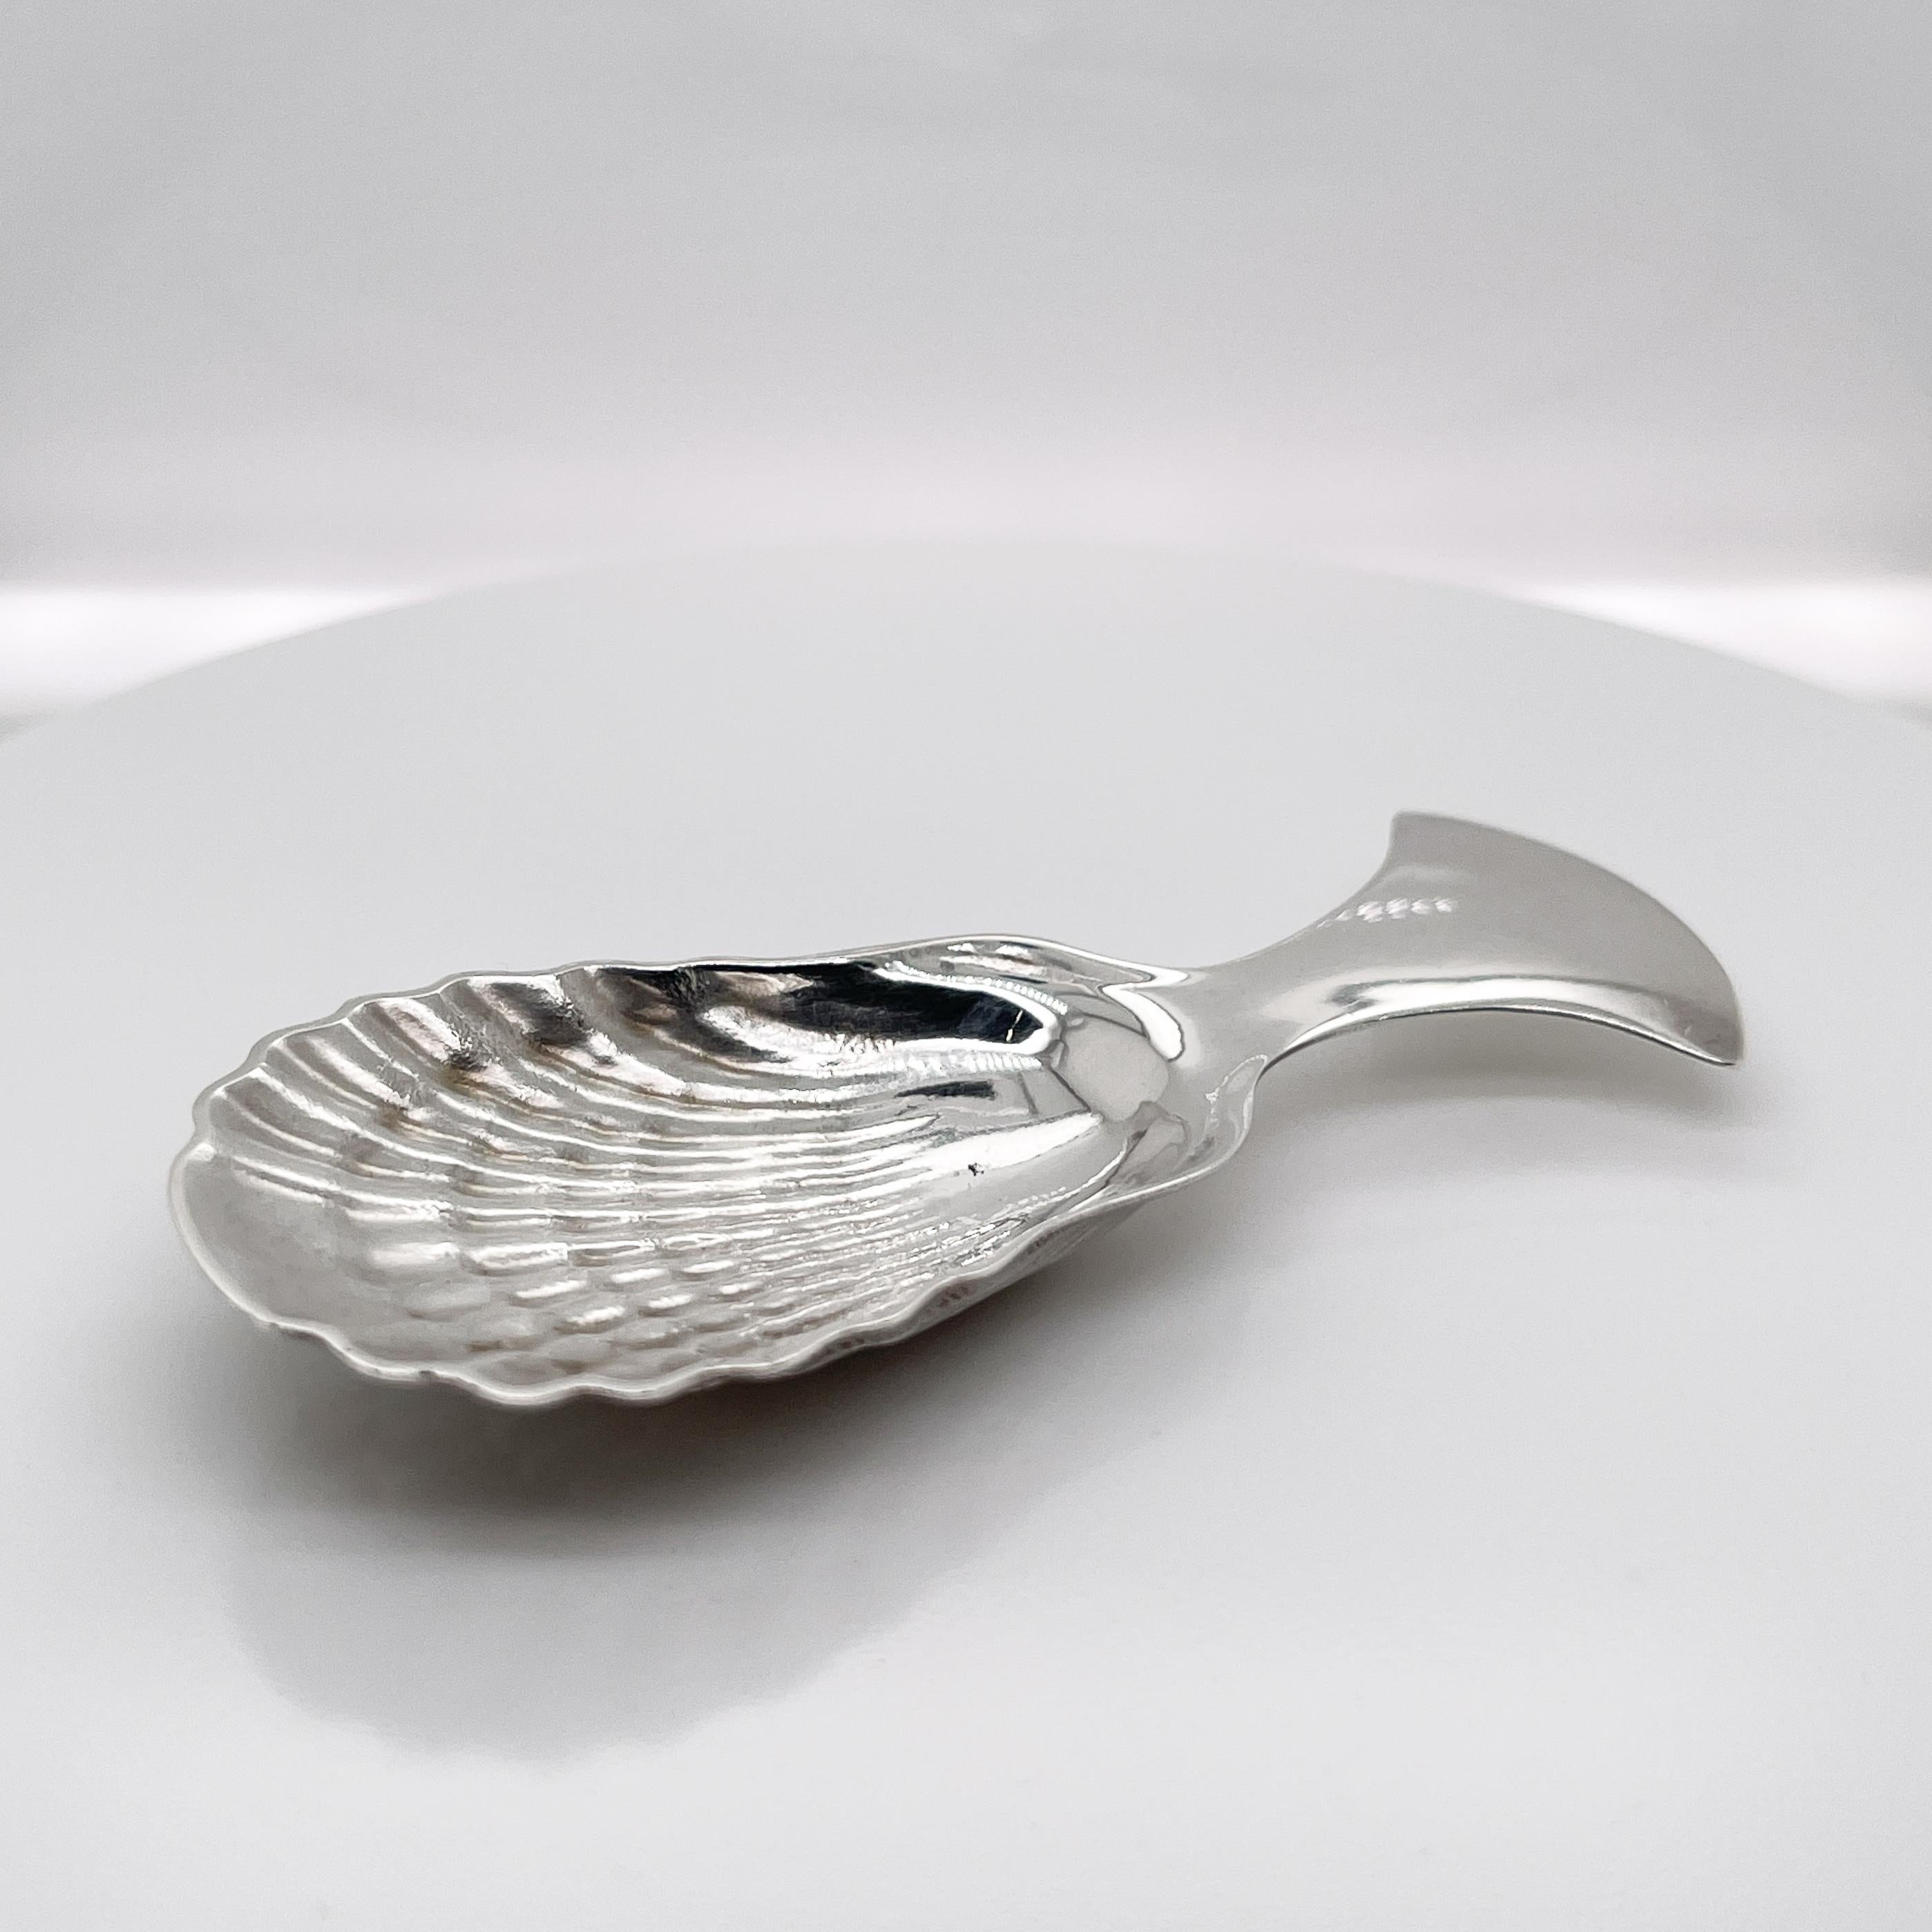 A very fine sterling silver tea caddy spoon.

By Tiffany & Co.

With a scallop shell shaped bowl and a short flared handle. The reverse has raised shell form decoration. 

Simply a wonderful tea accessory from Tiffany & Co.!

Date:
20th